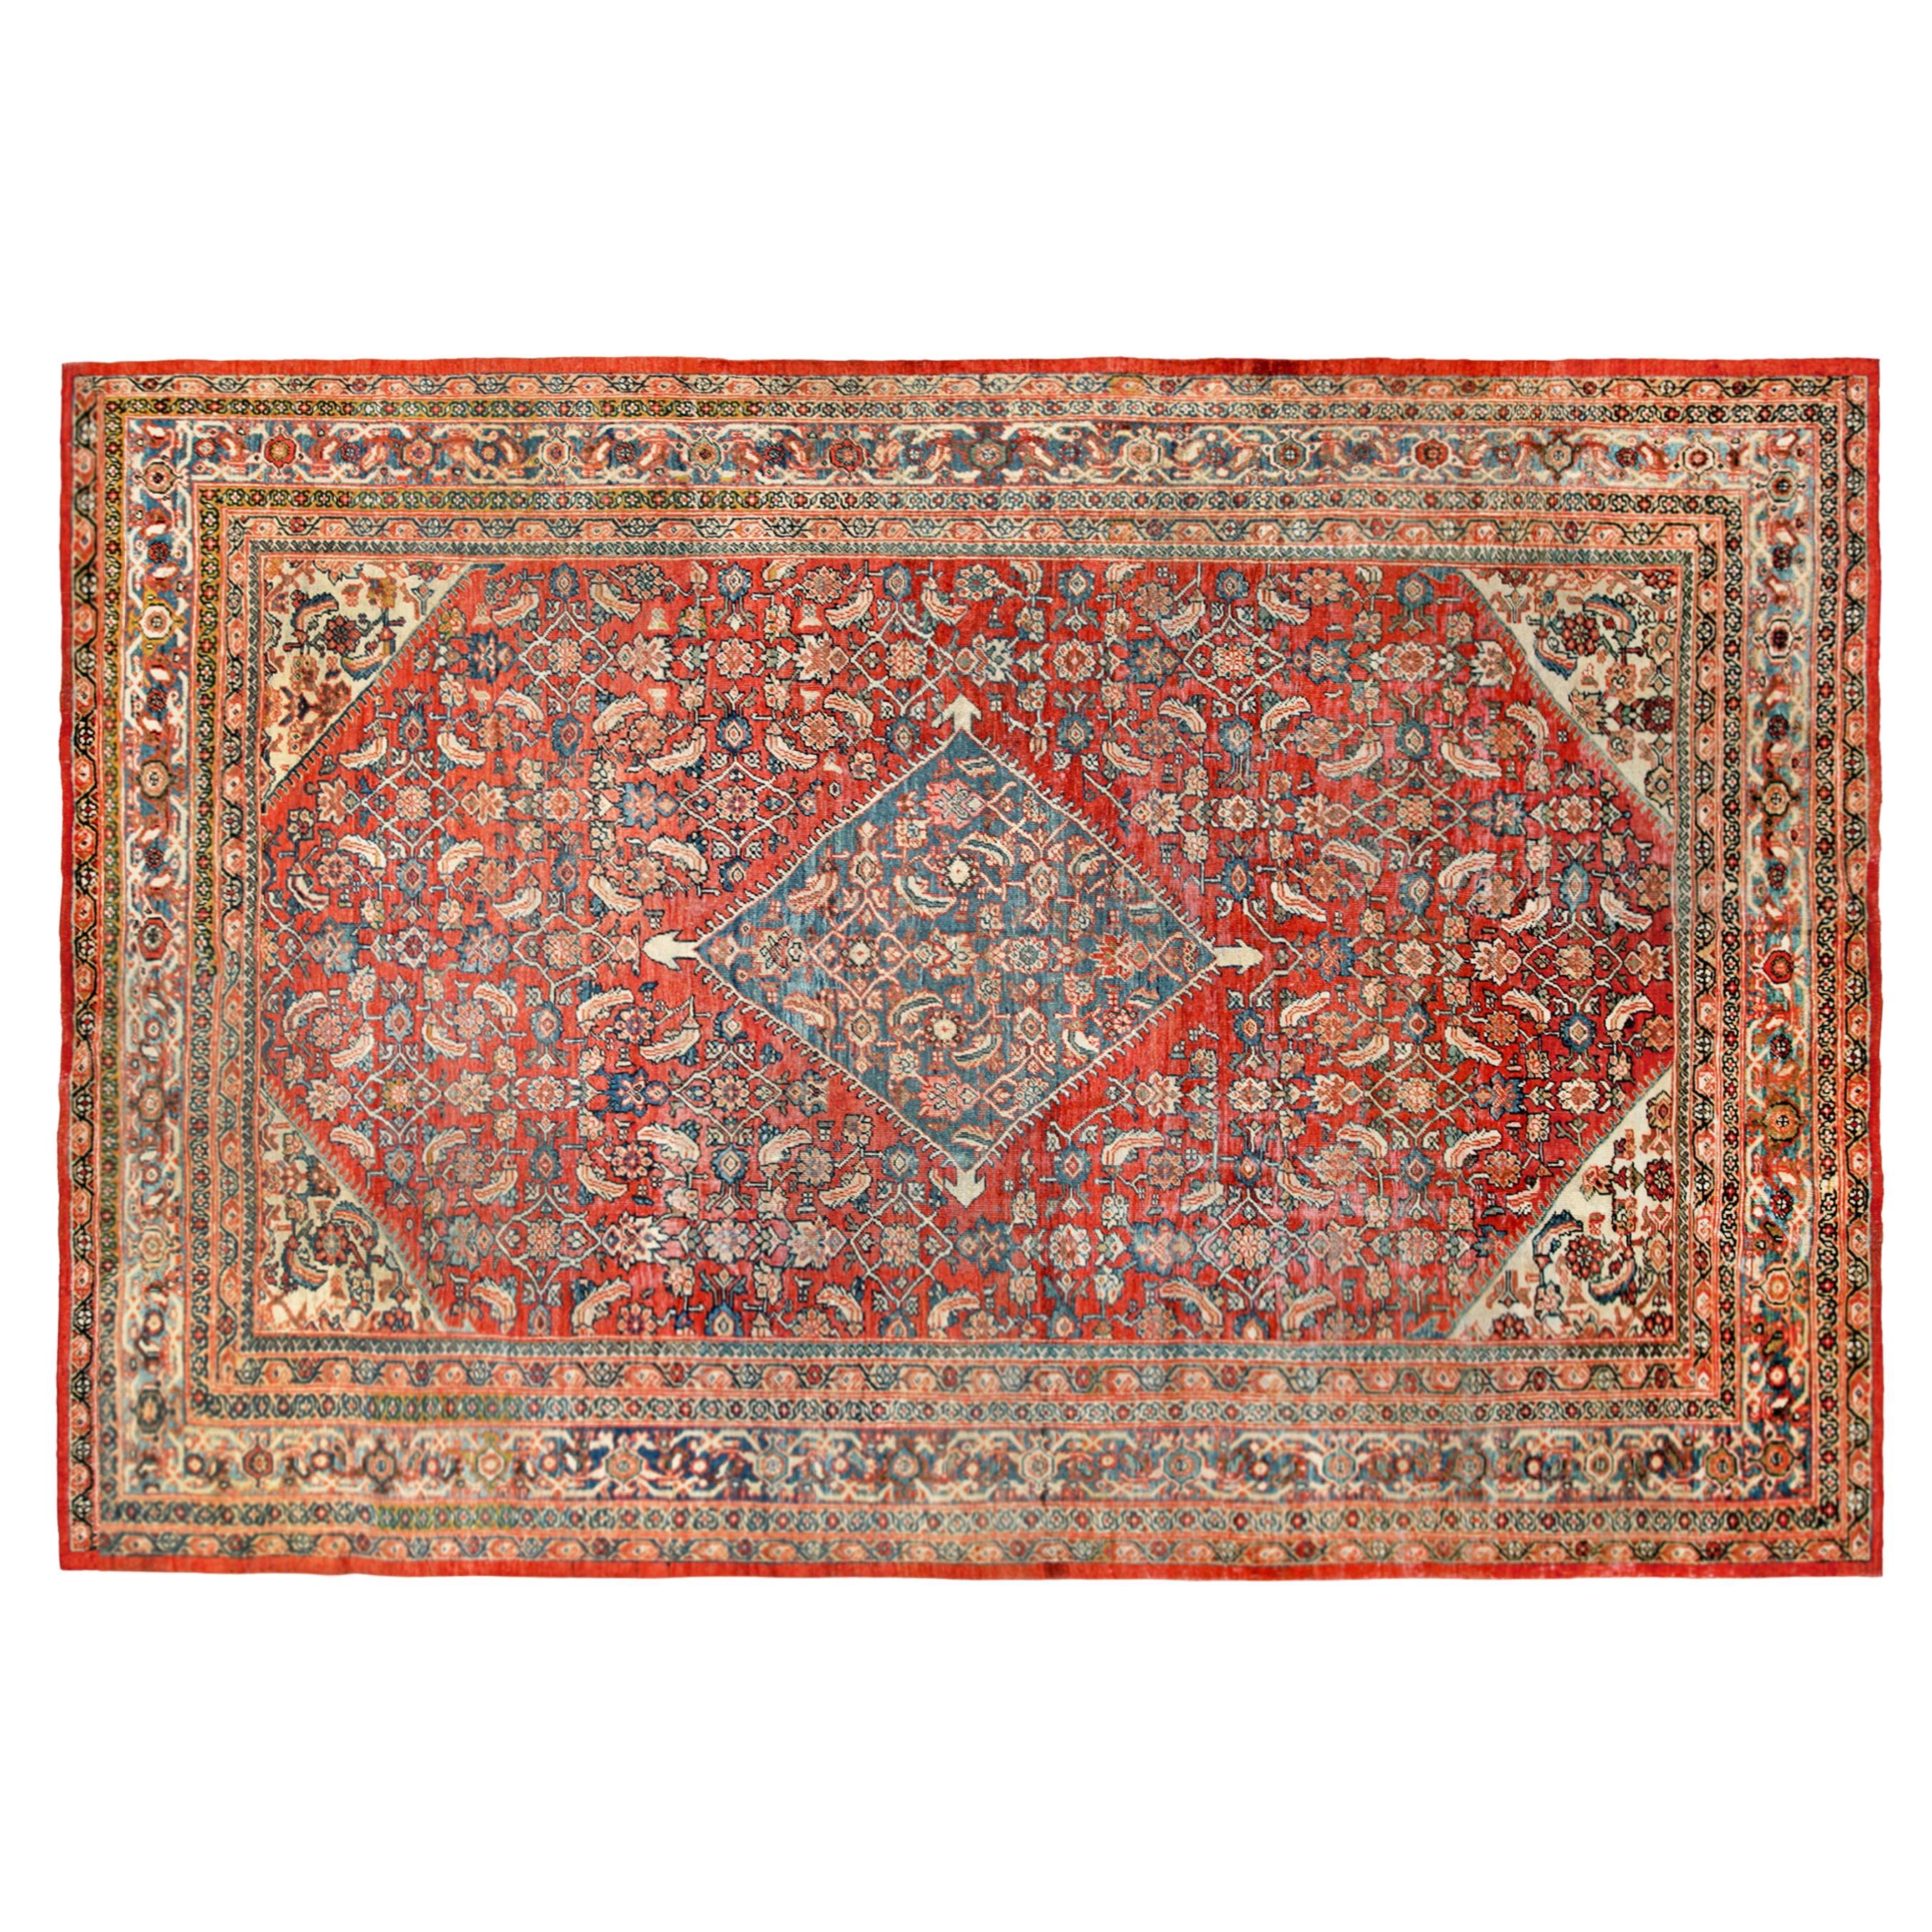 Antique Persian Sultanabad Oriental Carpet, Room Size, with Central Medallion